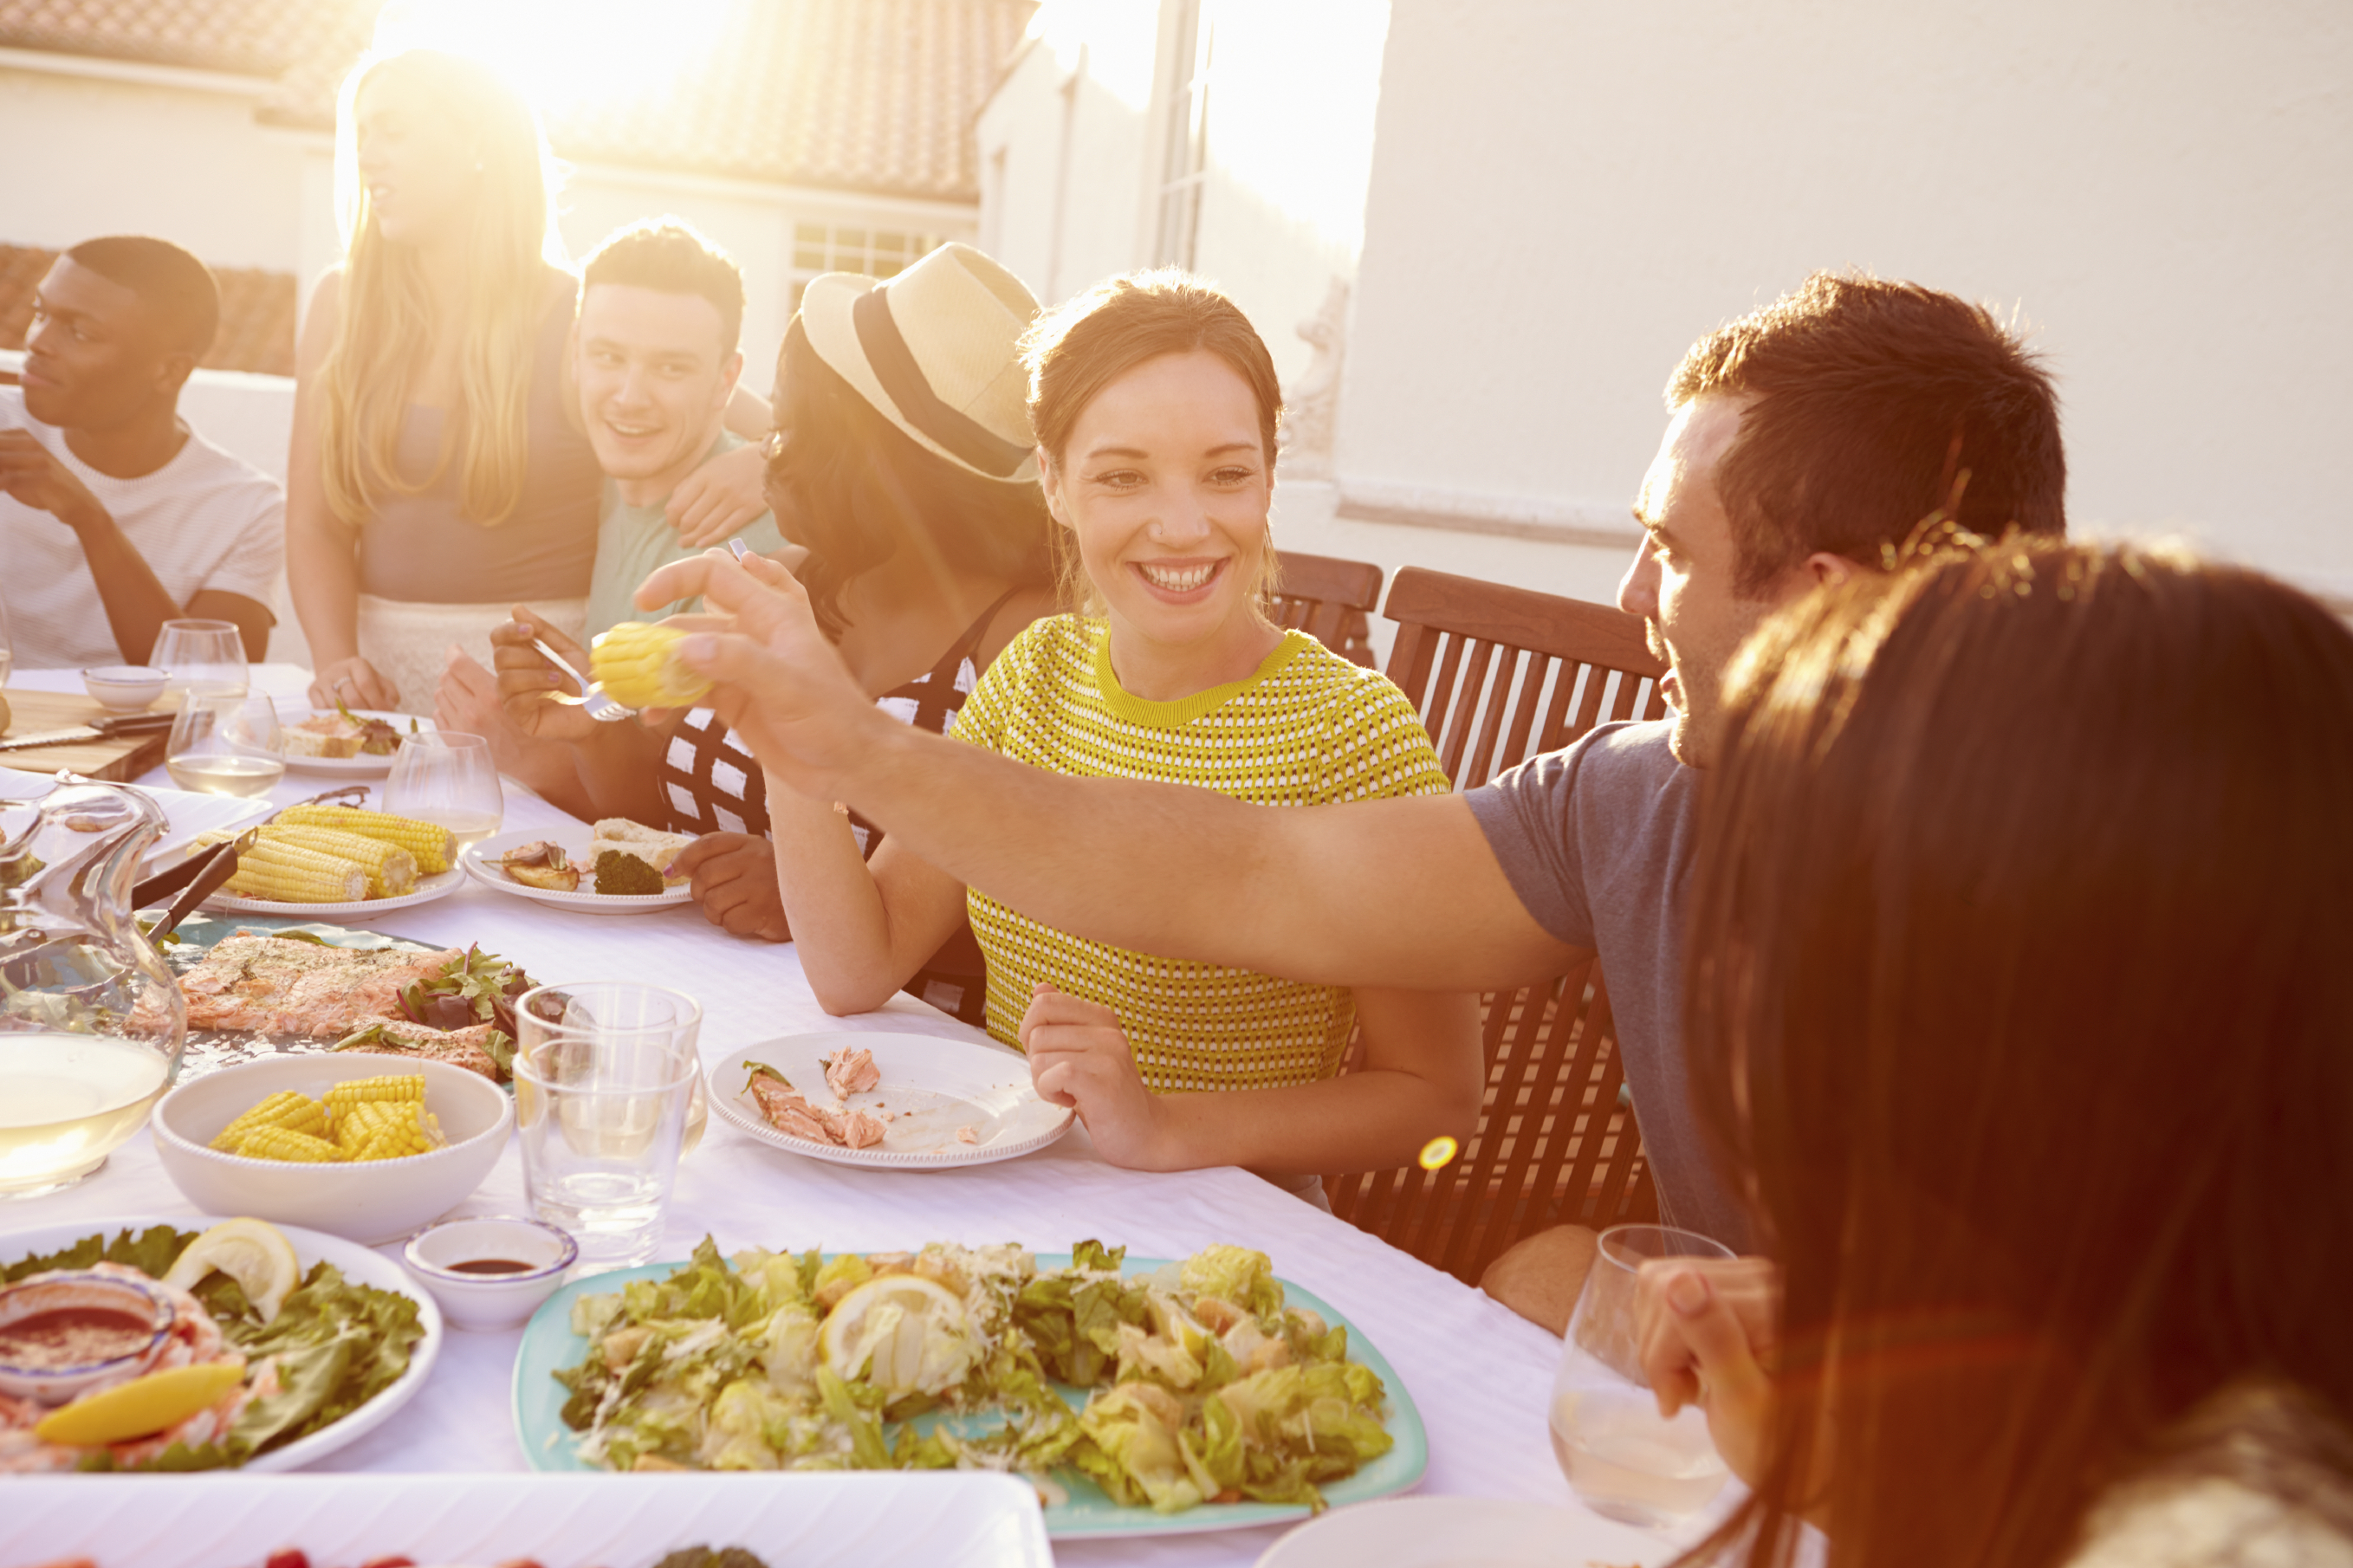 Couple Enjoying Outdoor Summer Meal With Friends